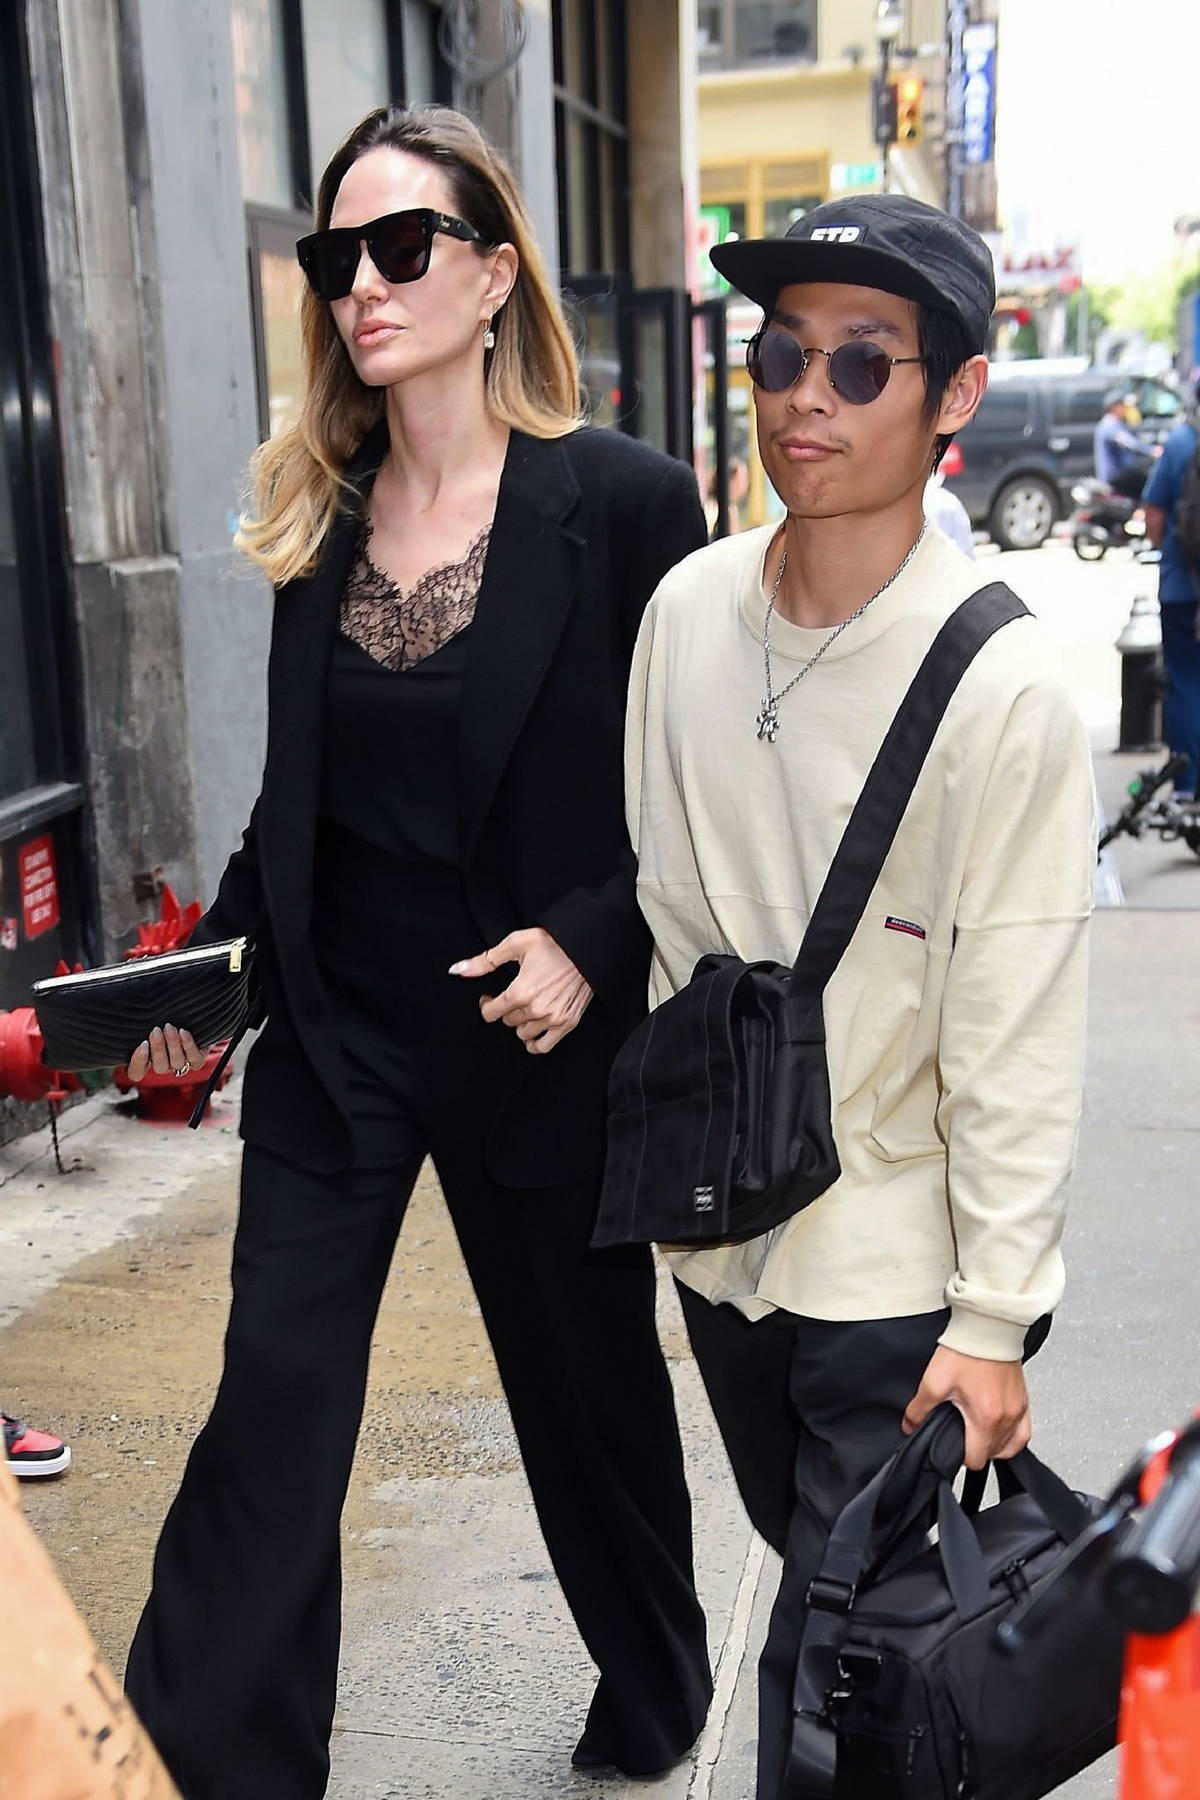 Angelina Jolie looks classy as ever in black pantsuit while